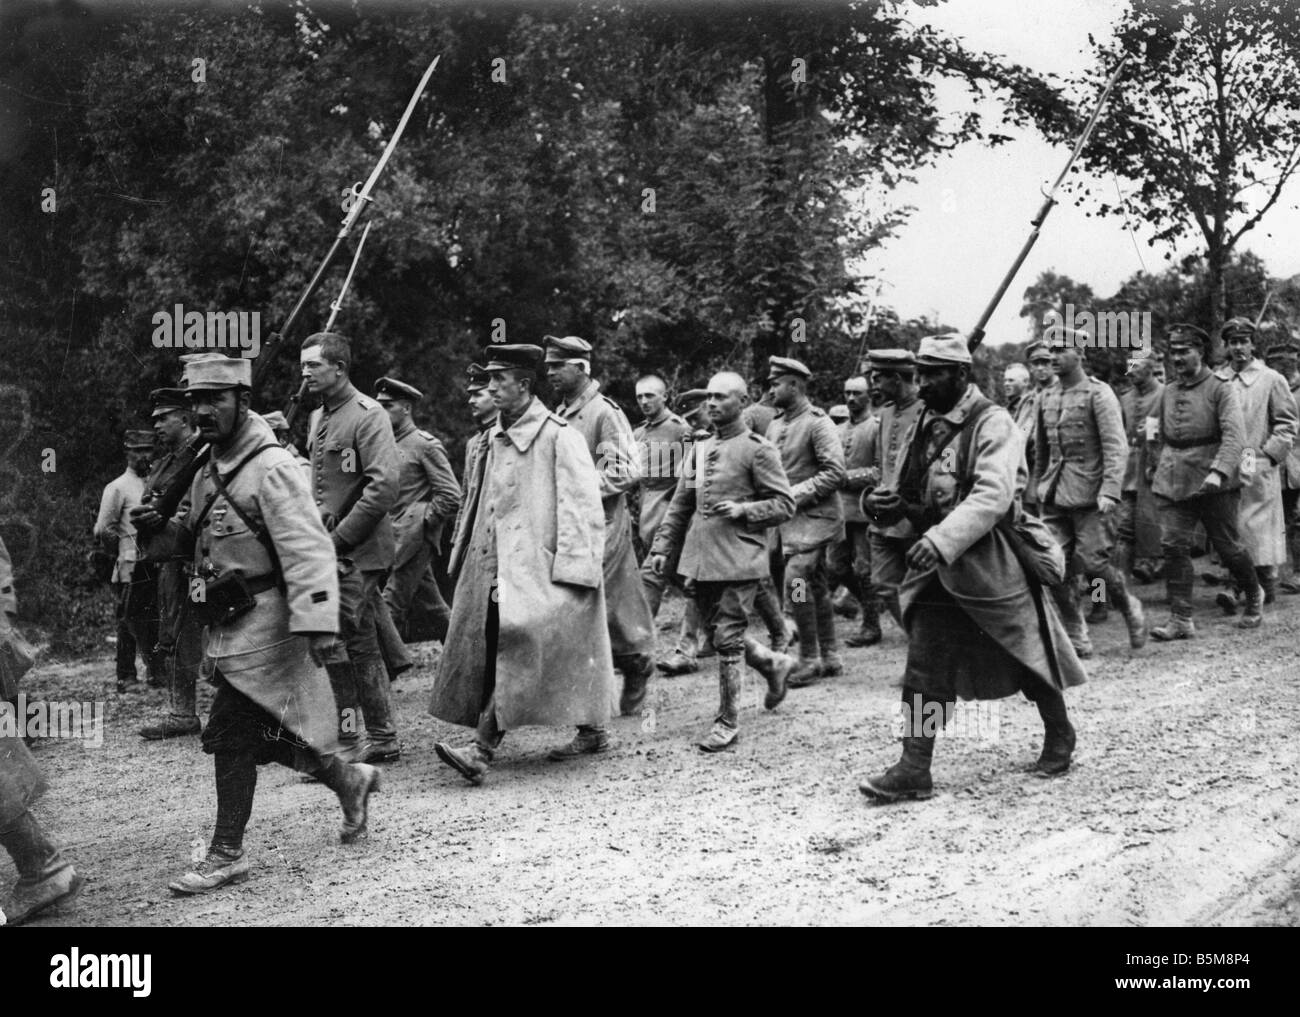 2 G55 K1 1915 10 WWI German Prisoners of War 1915 History WWI Prisoners of War German officers as French prisoners of war on the Stock Photo